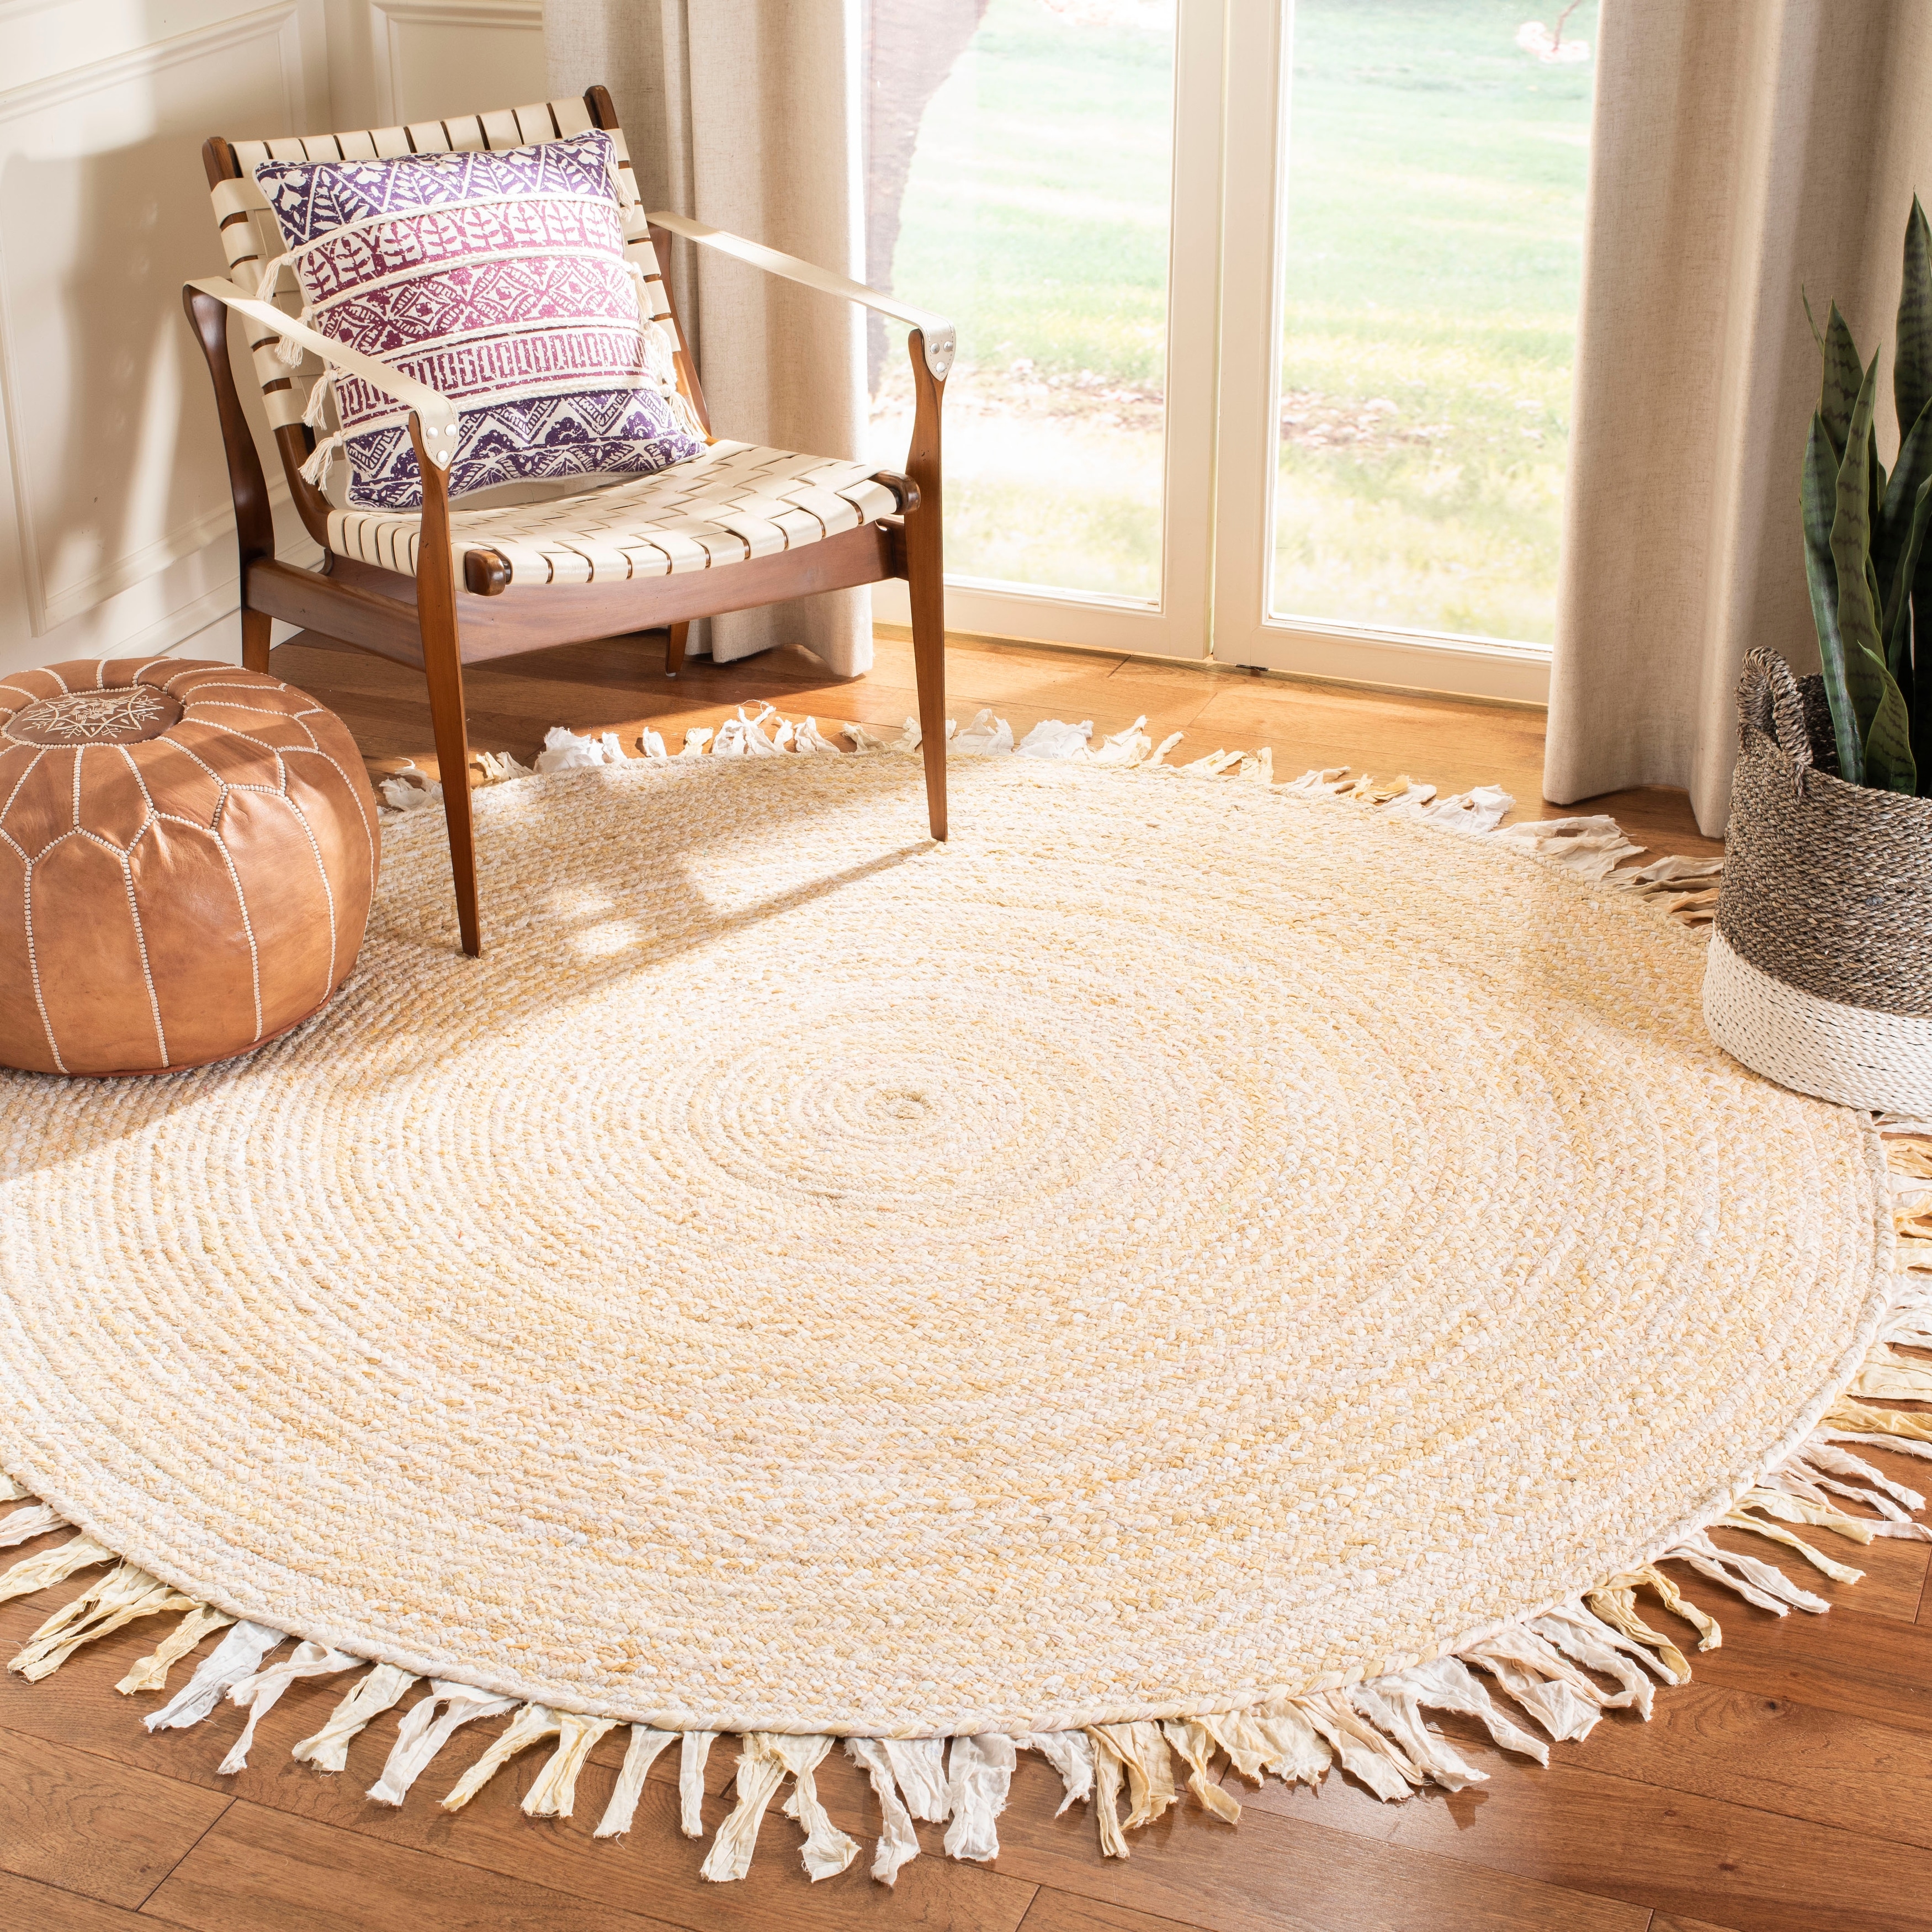 https://ak1.ostkcdn.com/images/products/is/images/direct/d97ef24c1e4201b67d63549f86aa6bd738d1016a/SAFAVIEH-Handmade-Braided-Libby-Country-Cotton-Rug-with-Fringe.jpg